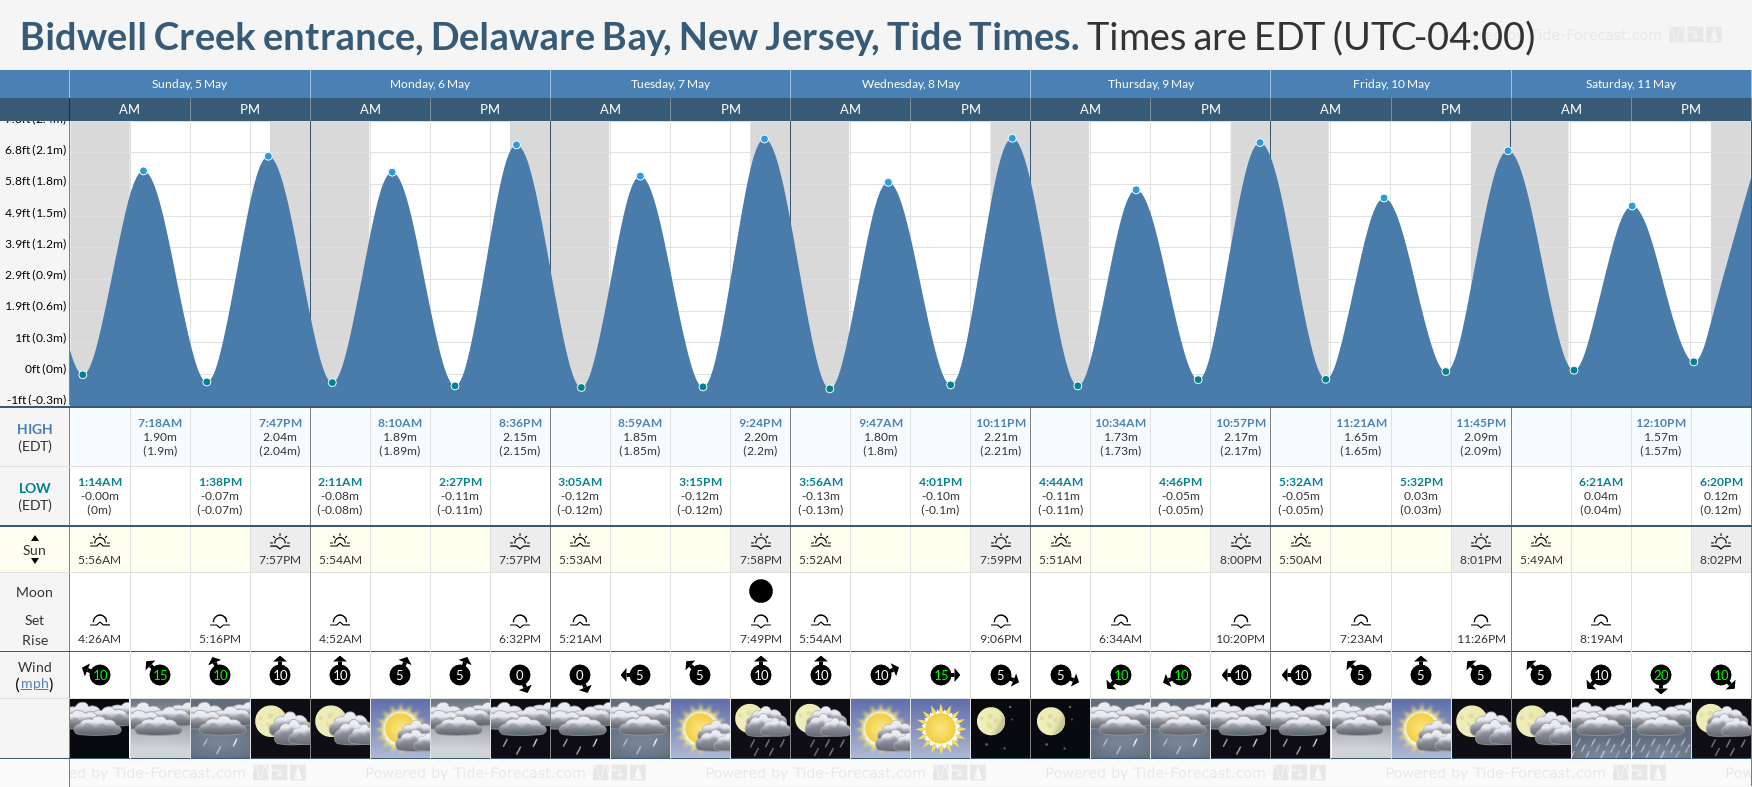 Bidwell Creek entrance, Delaware Bay, New Jersey Tide Chart including high and low tide tide times for the next 7 days